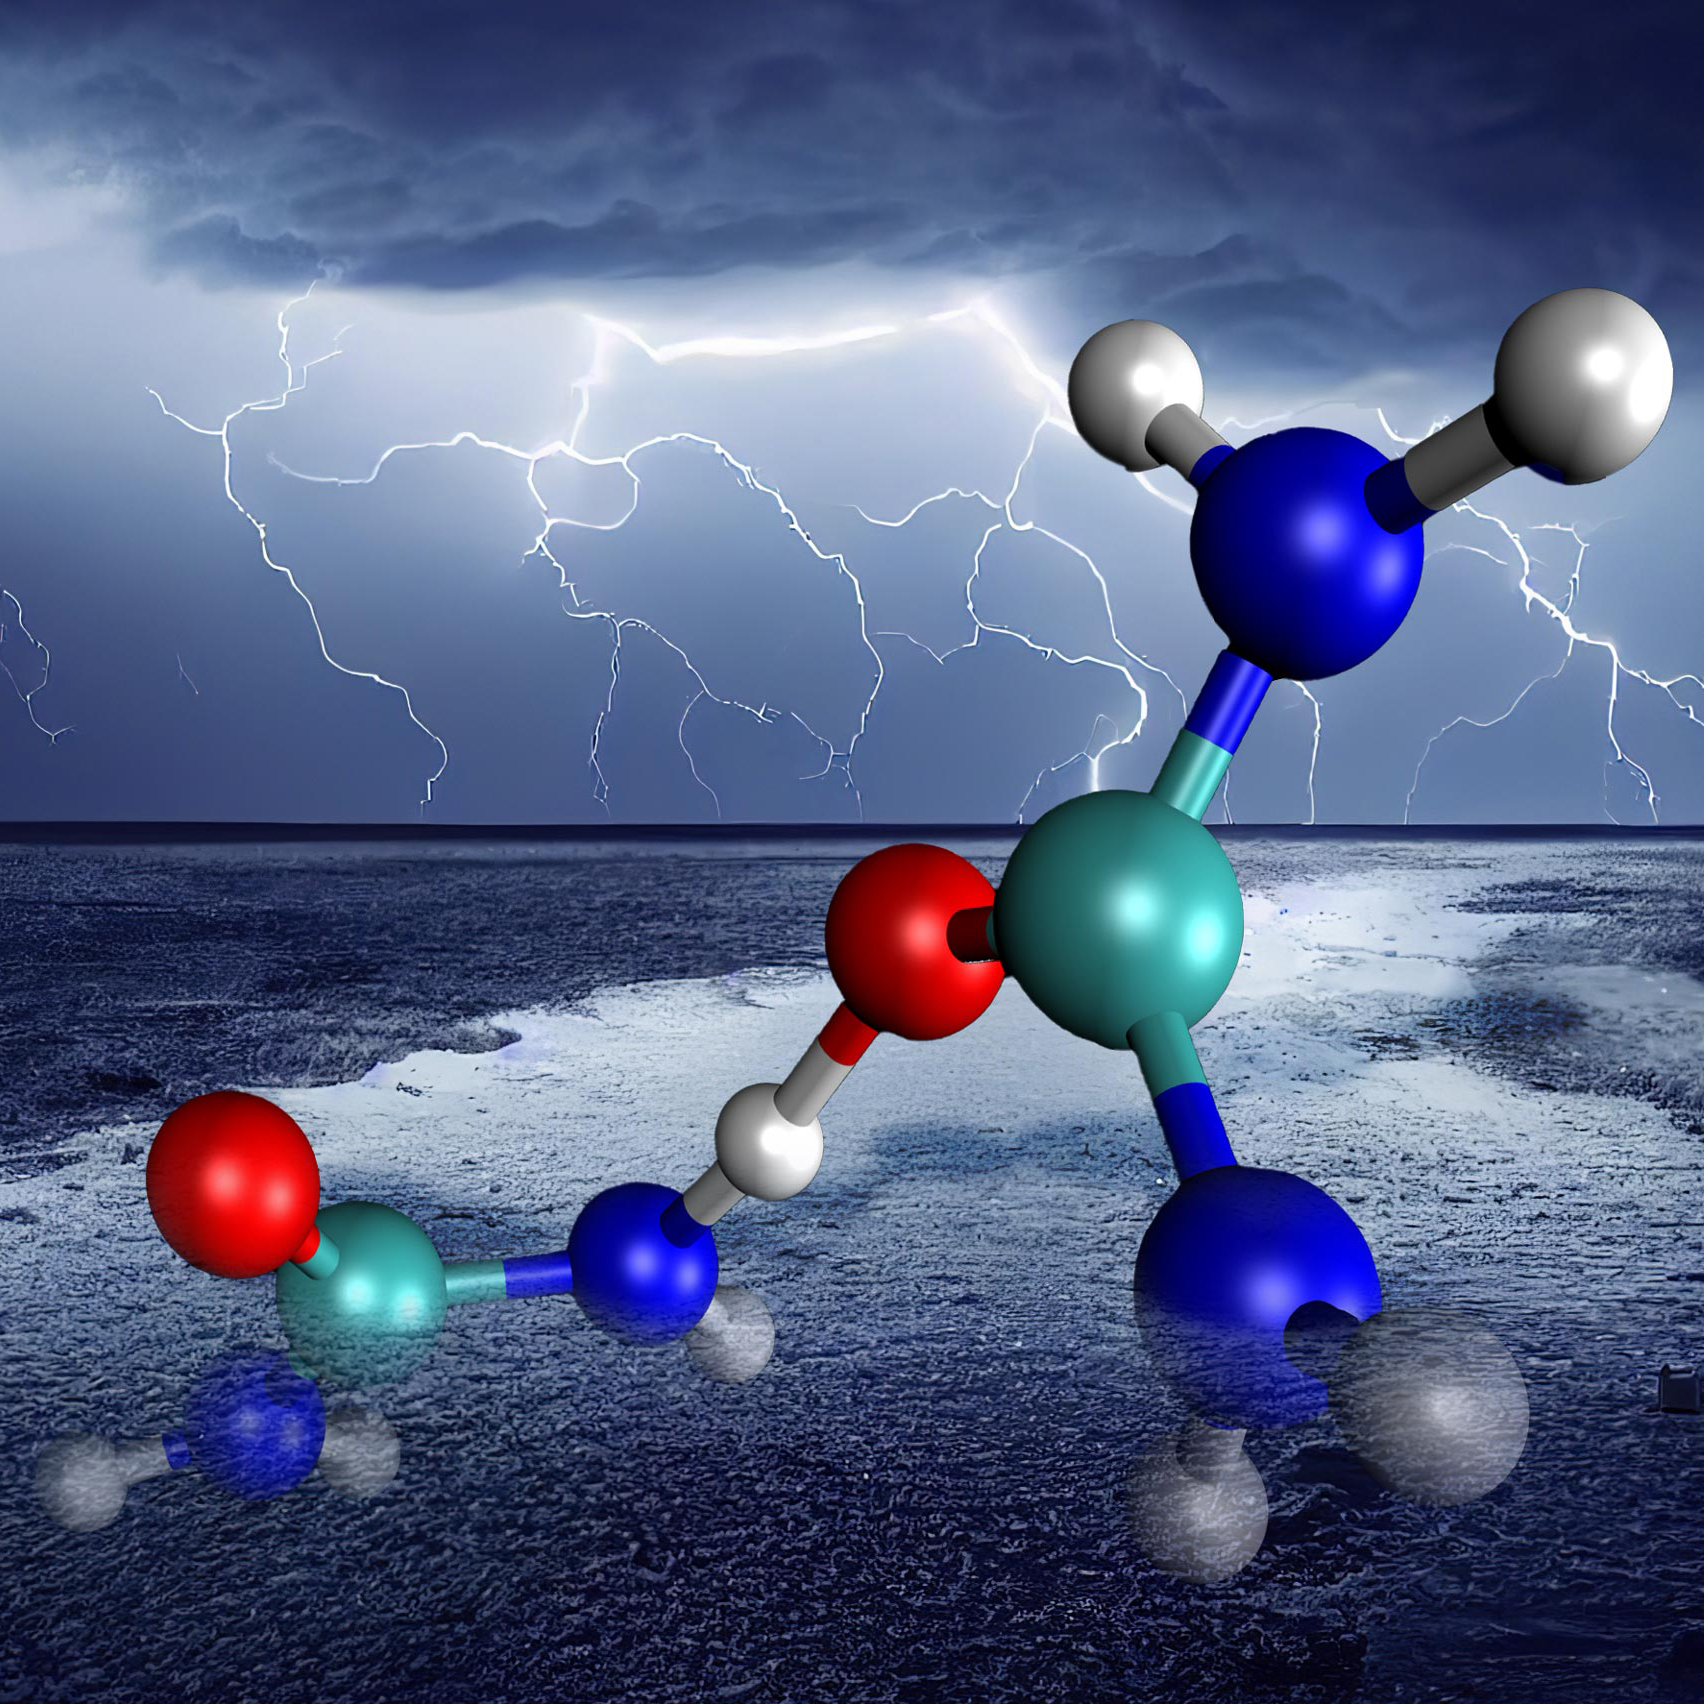 Enlarged view: The sea with lightning in the background. There is a molecule at the front of the picture.